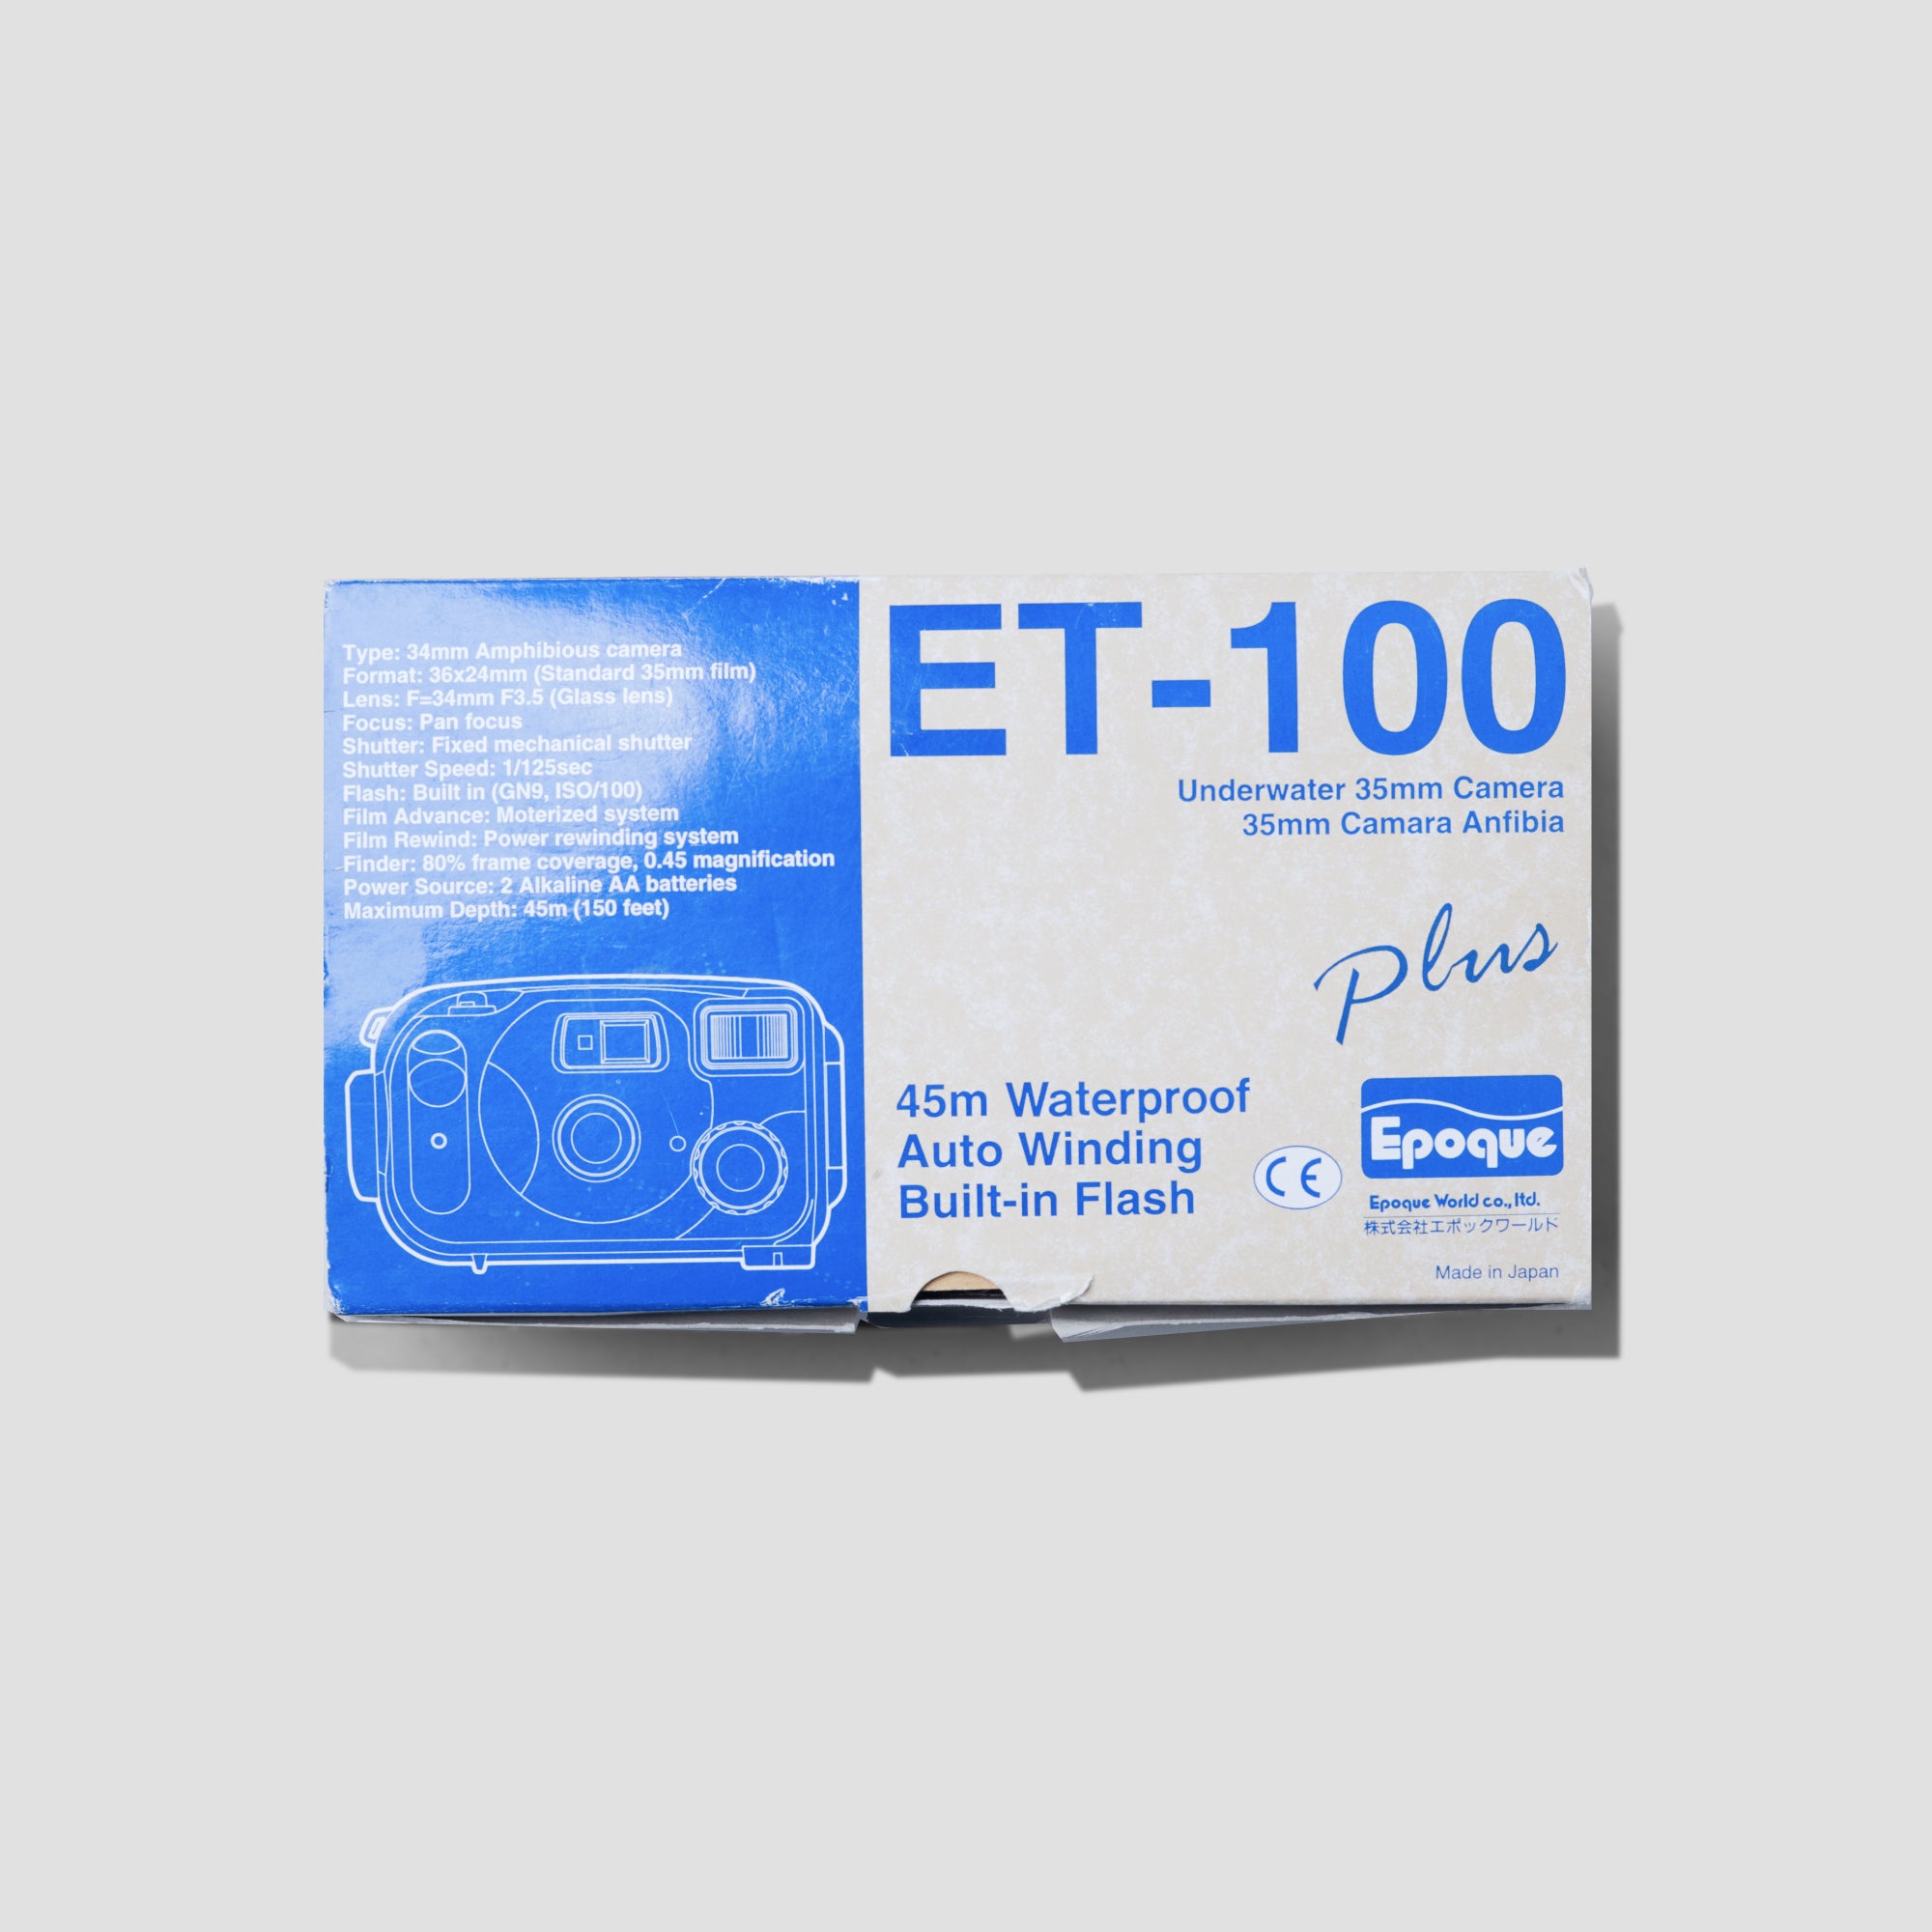 Buy Epoque ET-100 Plus now at Analogue Amsterdam